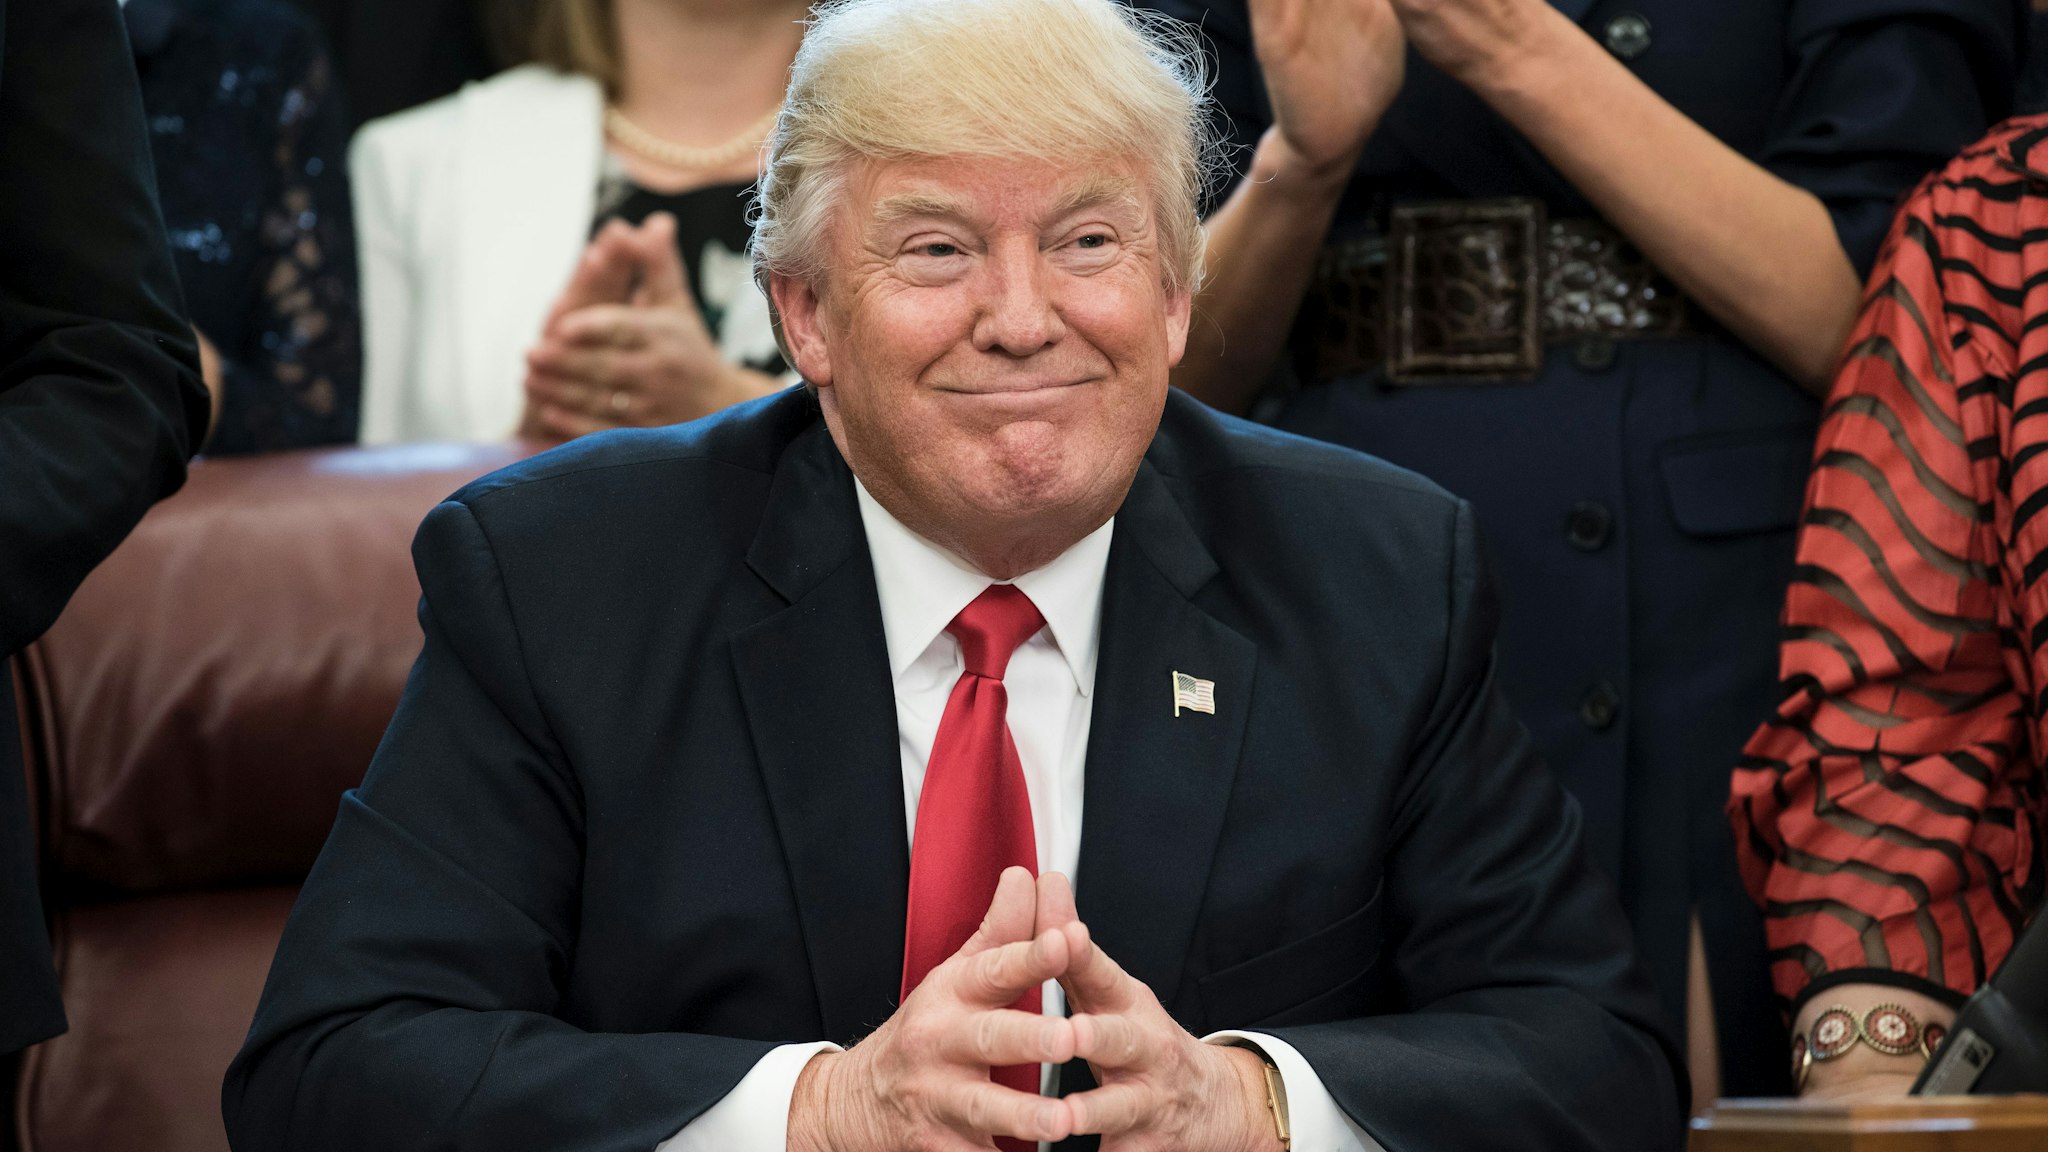 US President Donald Trump smiles during a national teacher of the year event in the Oval Office of the White House April 26, 2017 in Washington, DC.